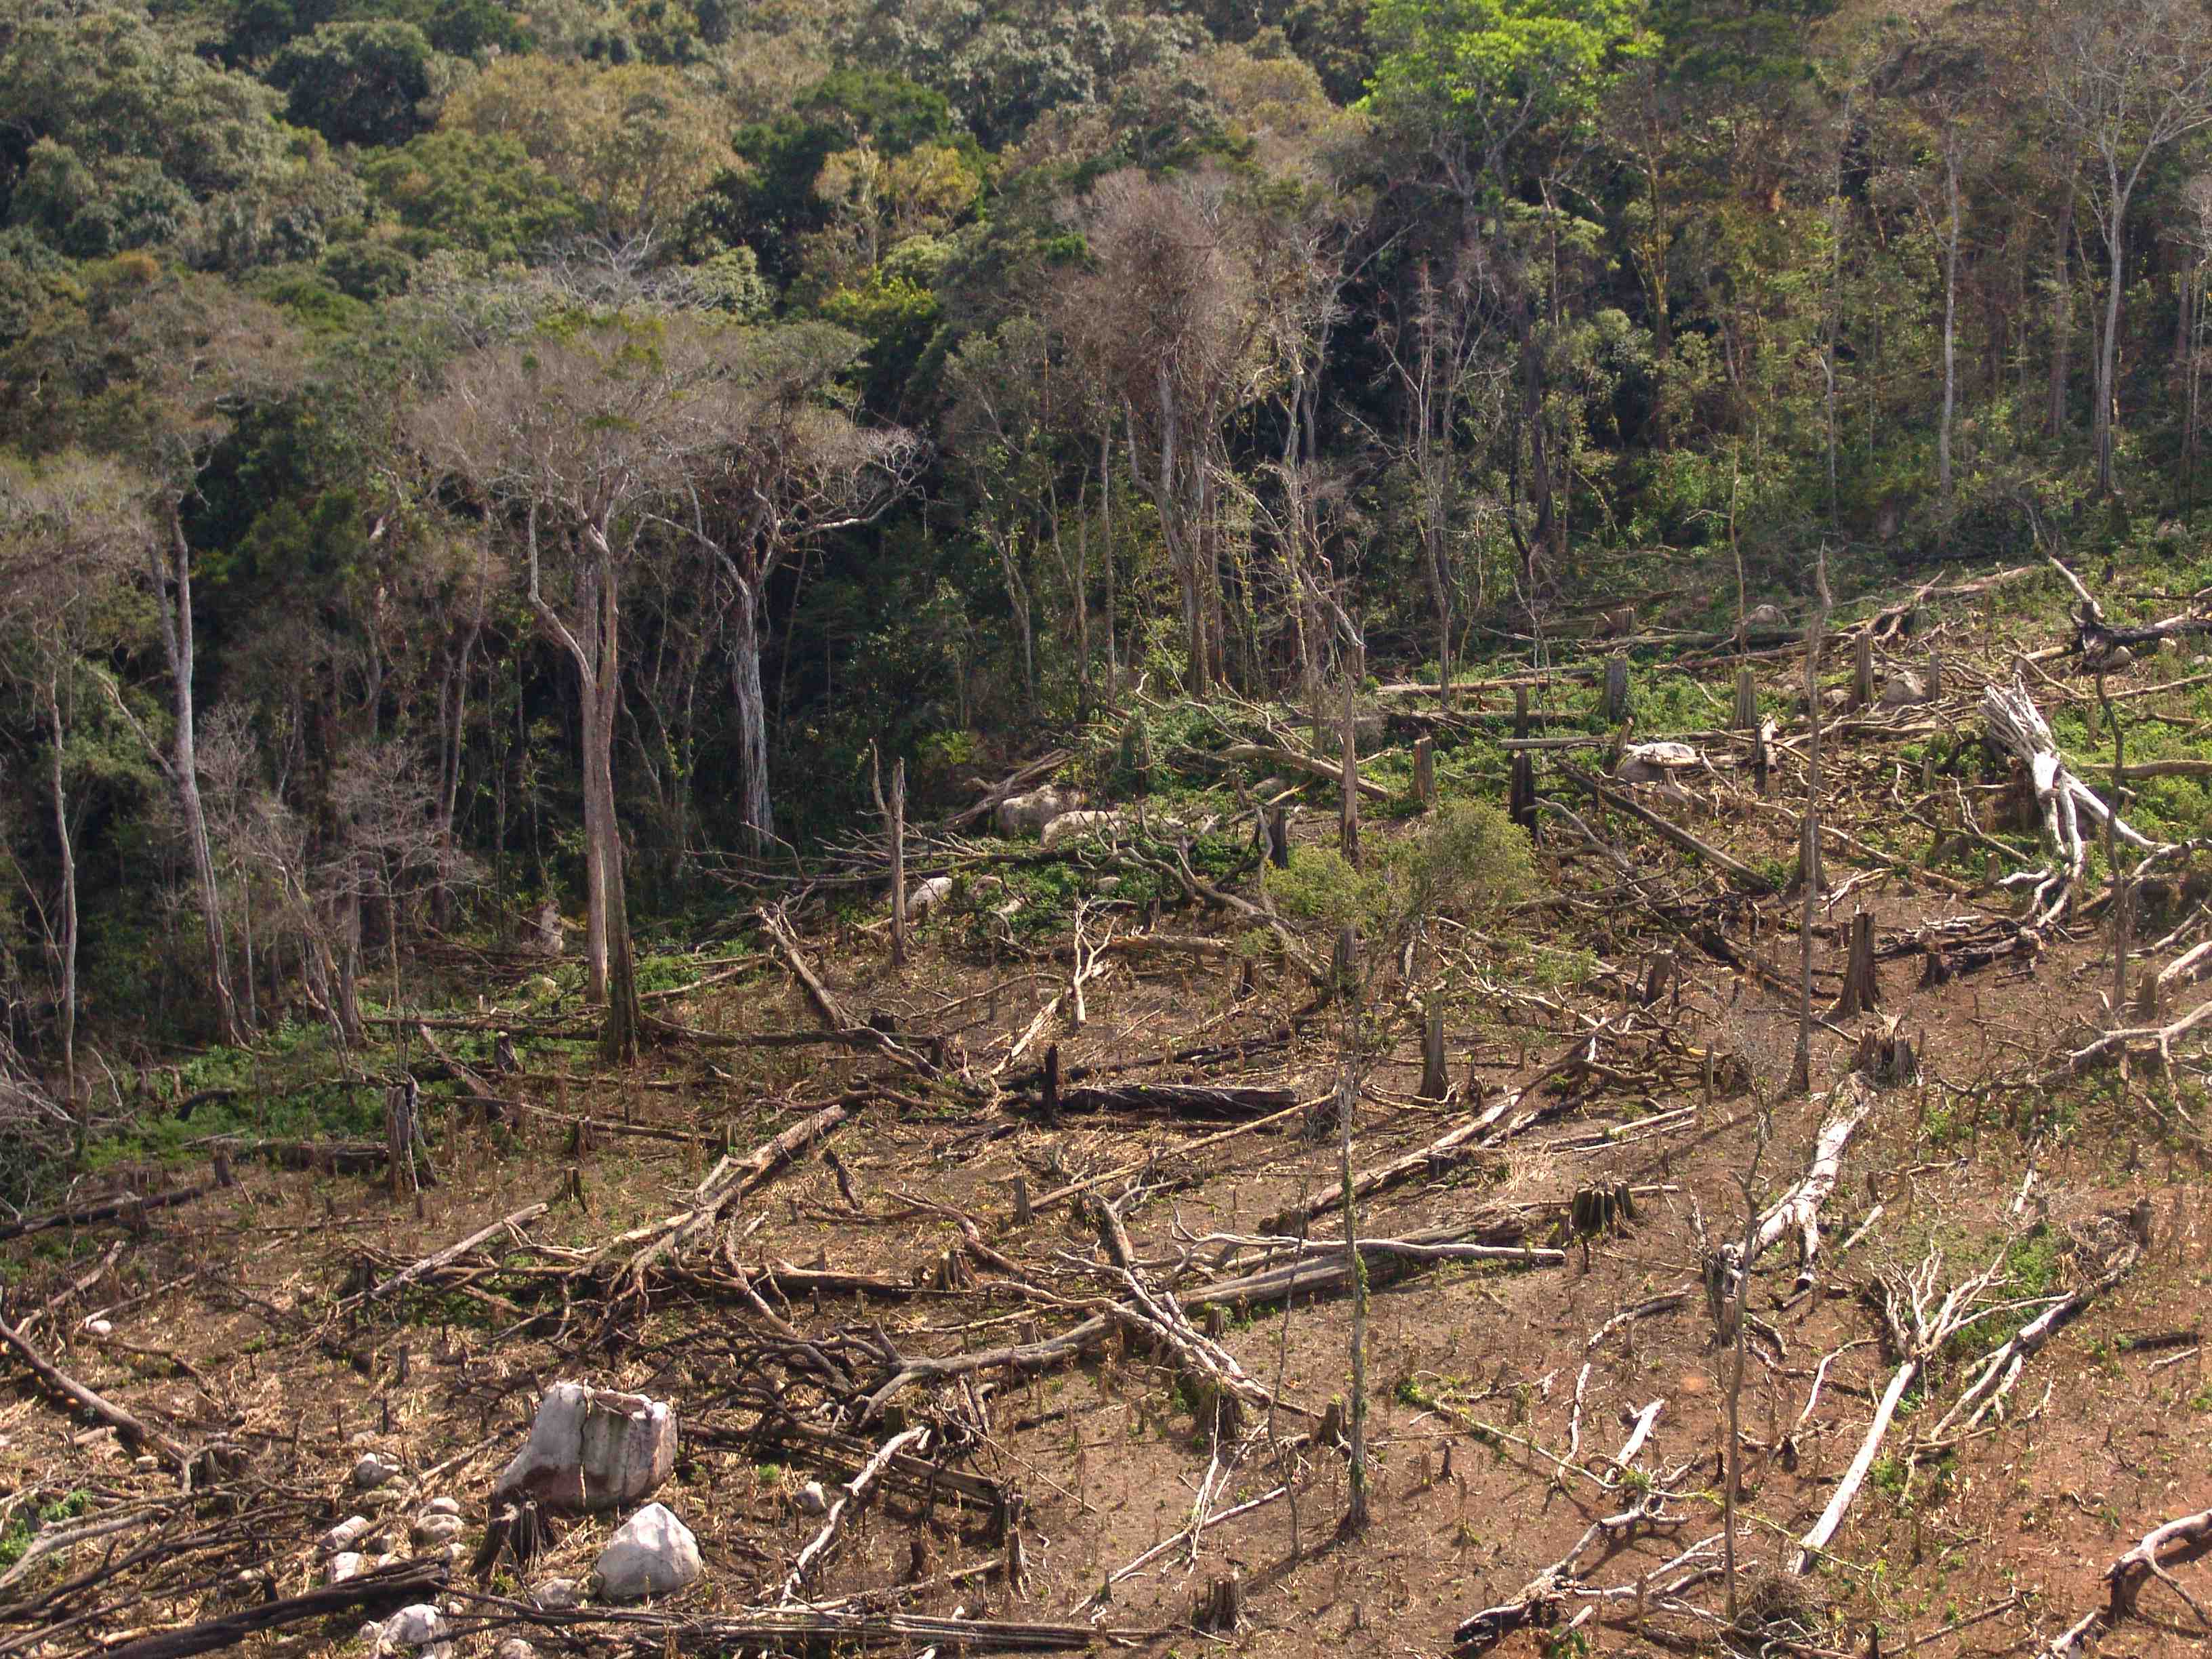 Illegal logging robs Mozambique of tax revenue. Photo by Wikipedia CC-BY-SA 2.0